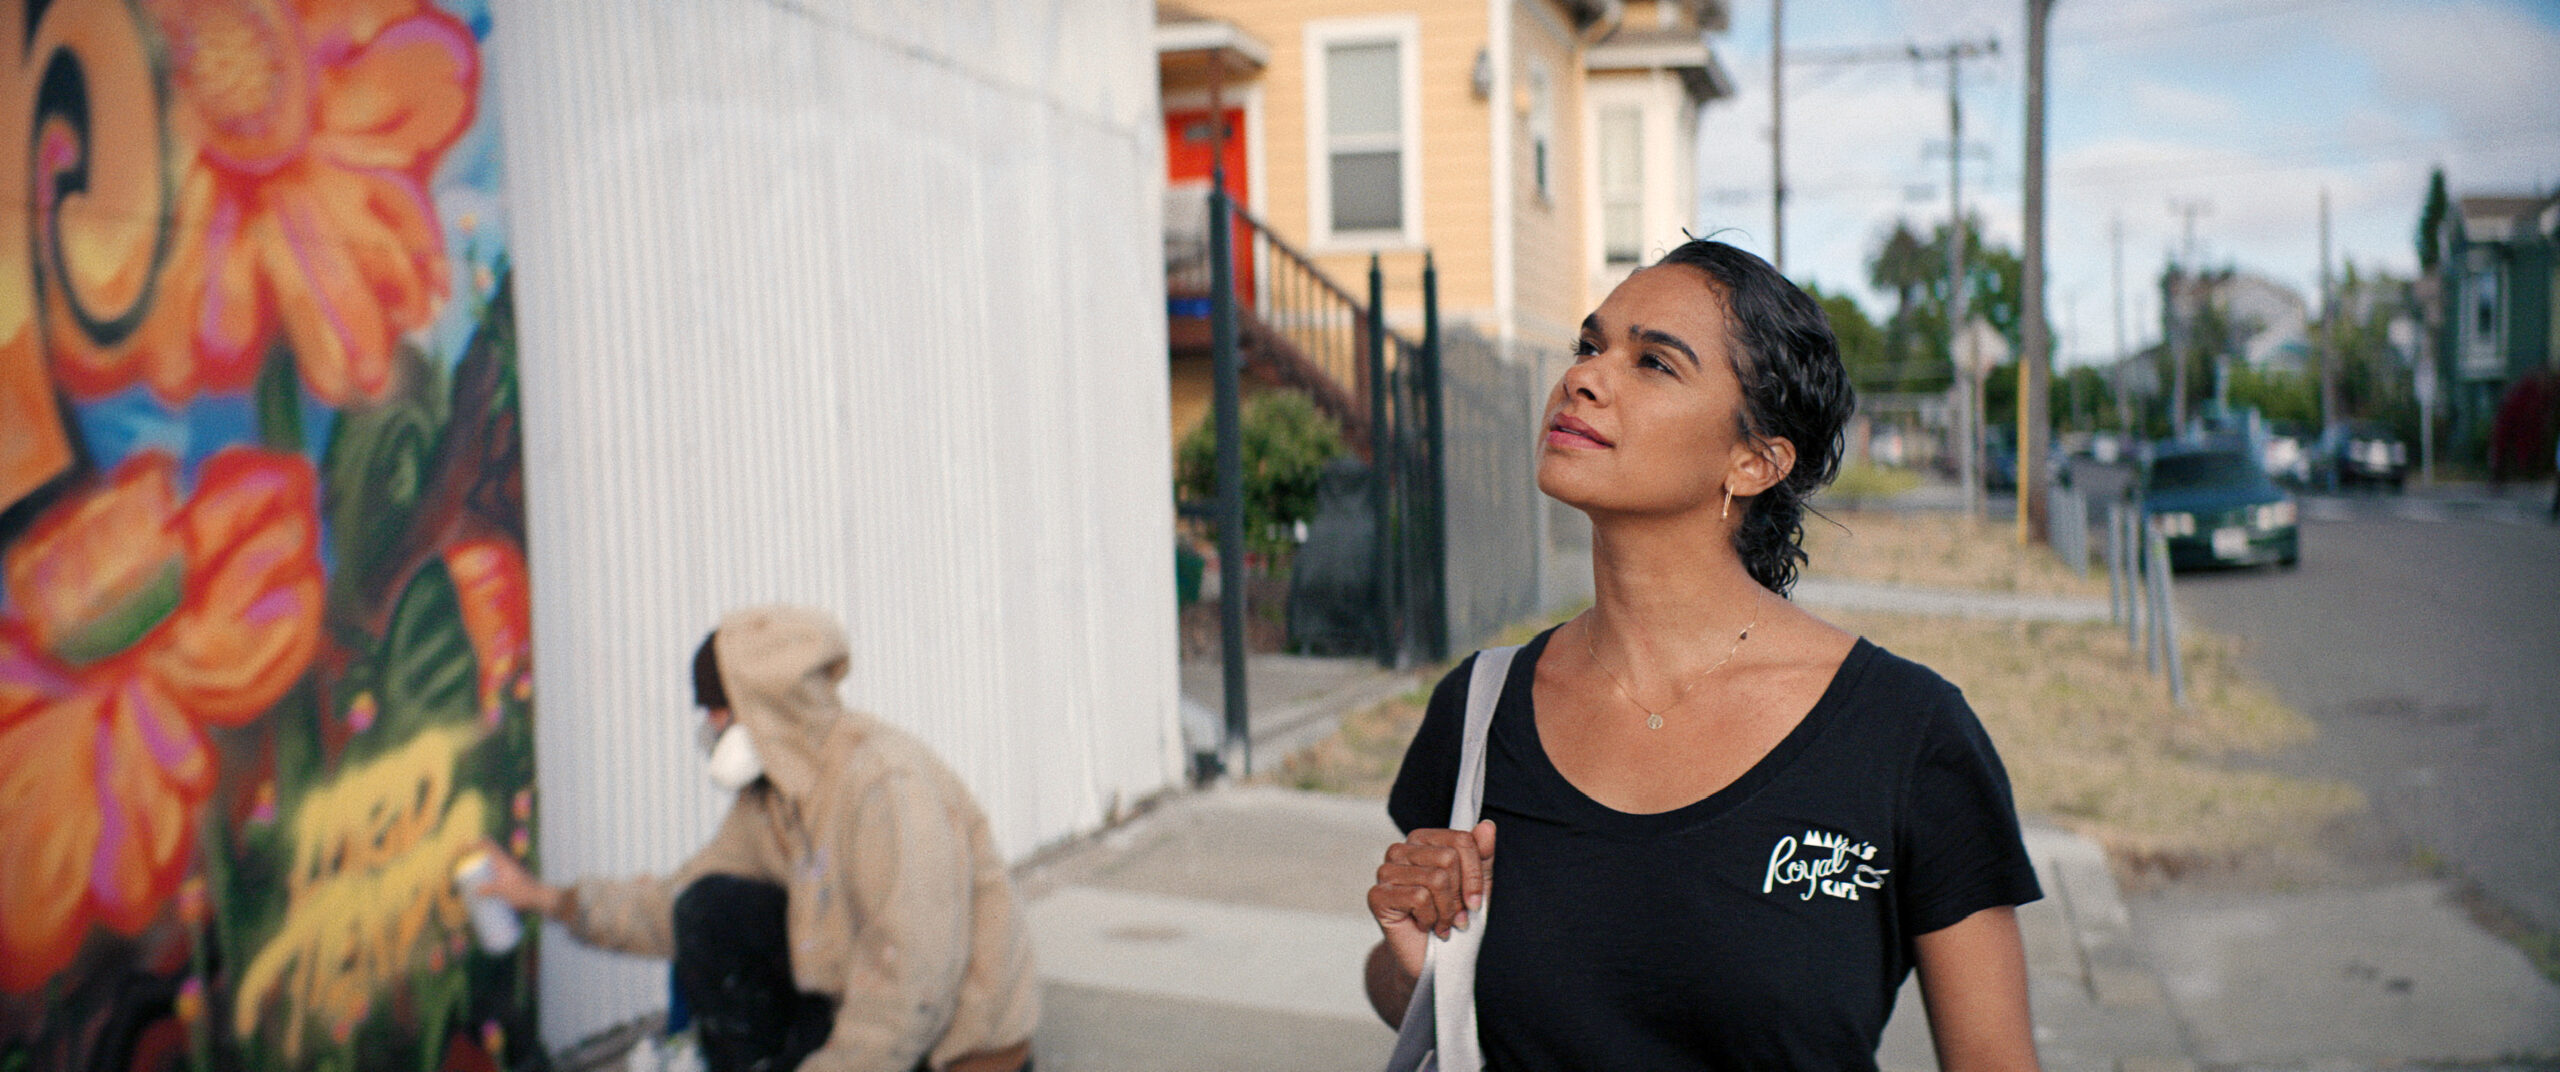 In a film still, Copeland, a light brown-skinned Black woman wearing a black t-shirt, walks along a city street, admiring a painted mural of flowers.